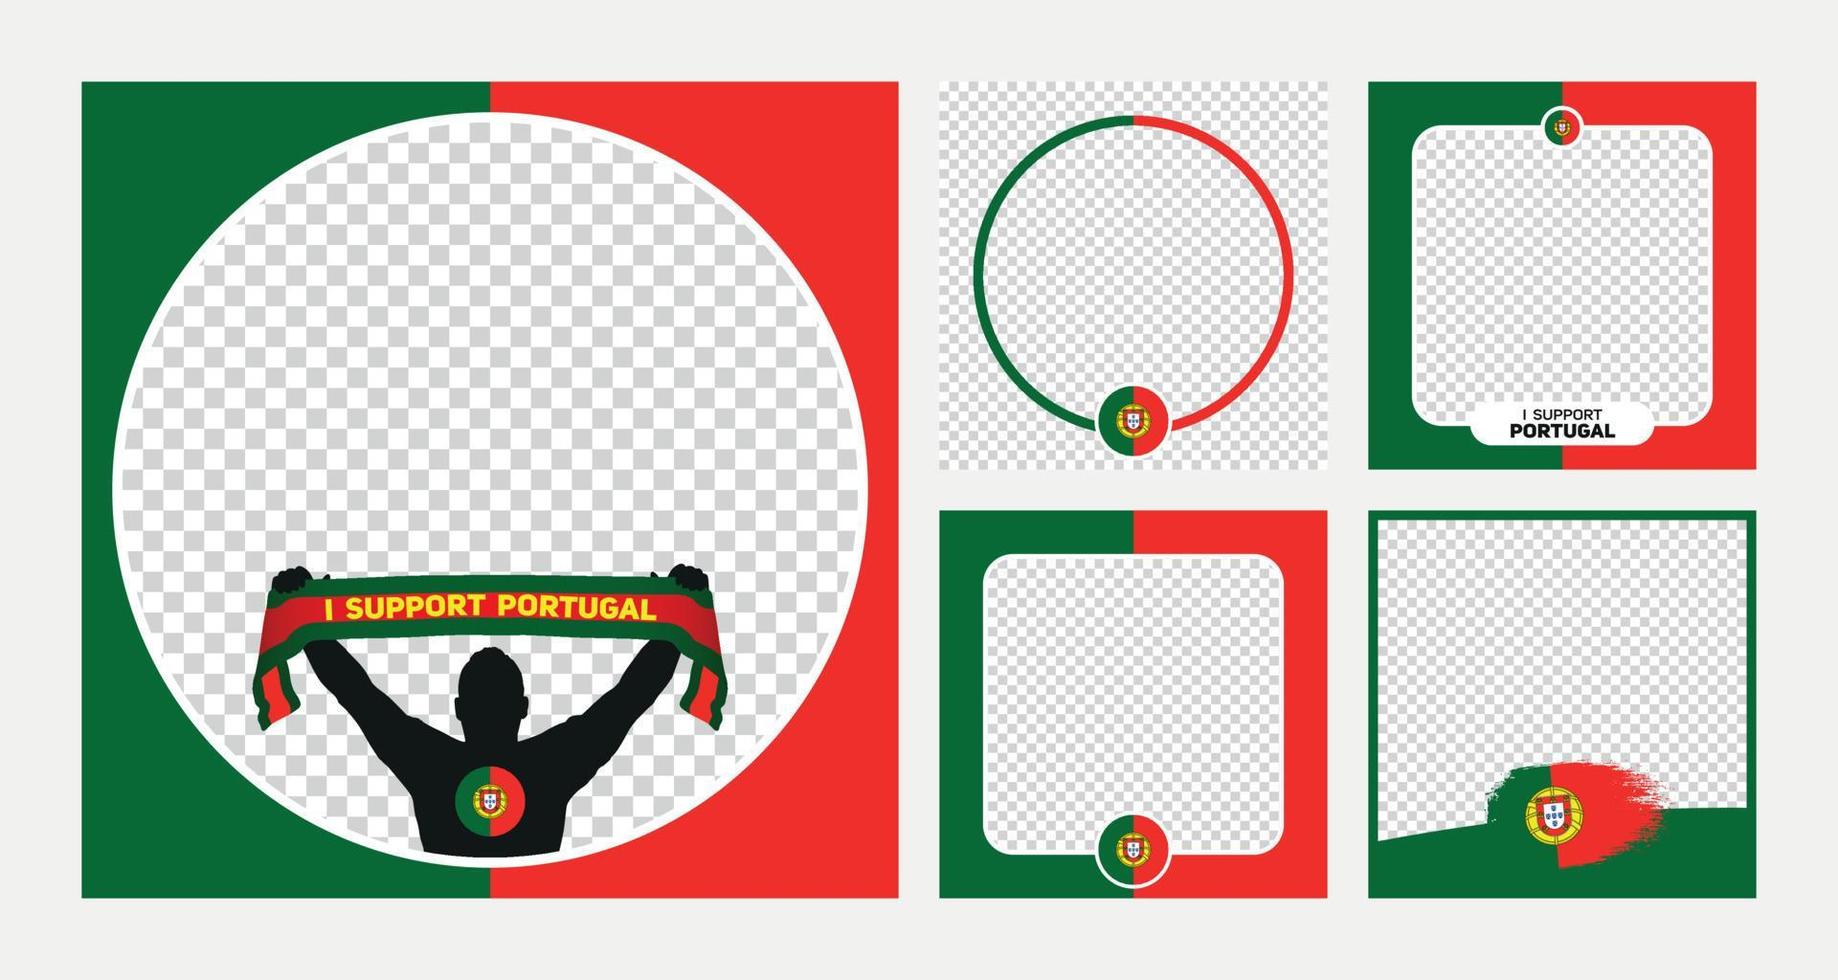 I support Portugal world football championship profil picture frame banners for social media vector